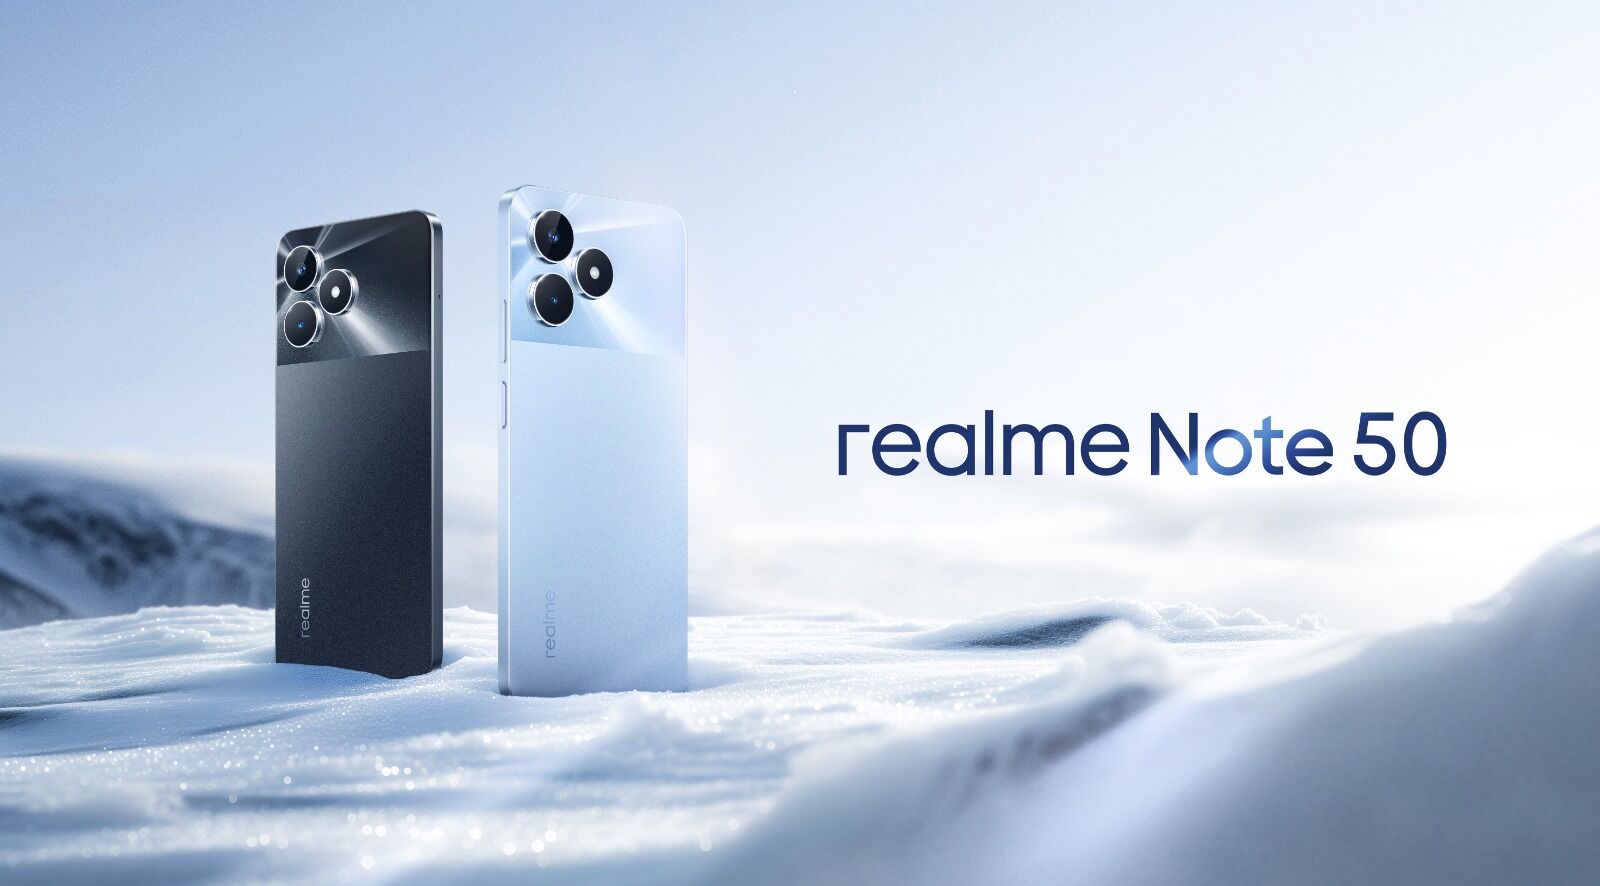 realme Note 50 Launched In Bangladesh With An Aim To Reform The Entry Level Smartphone Industry-Markedium